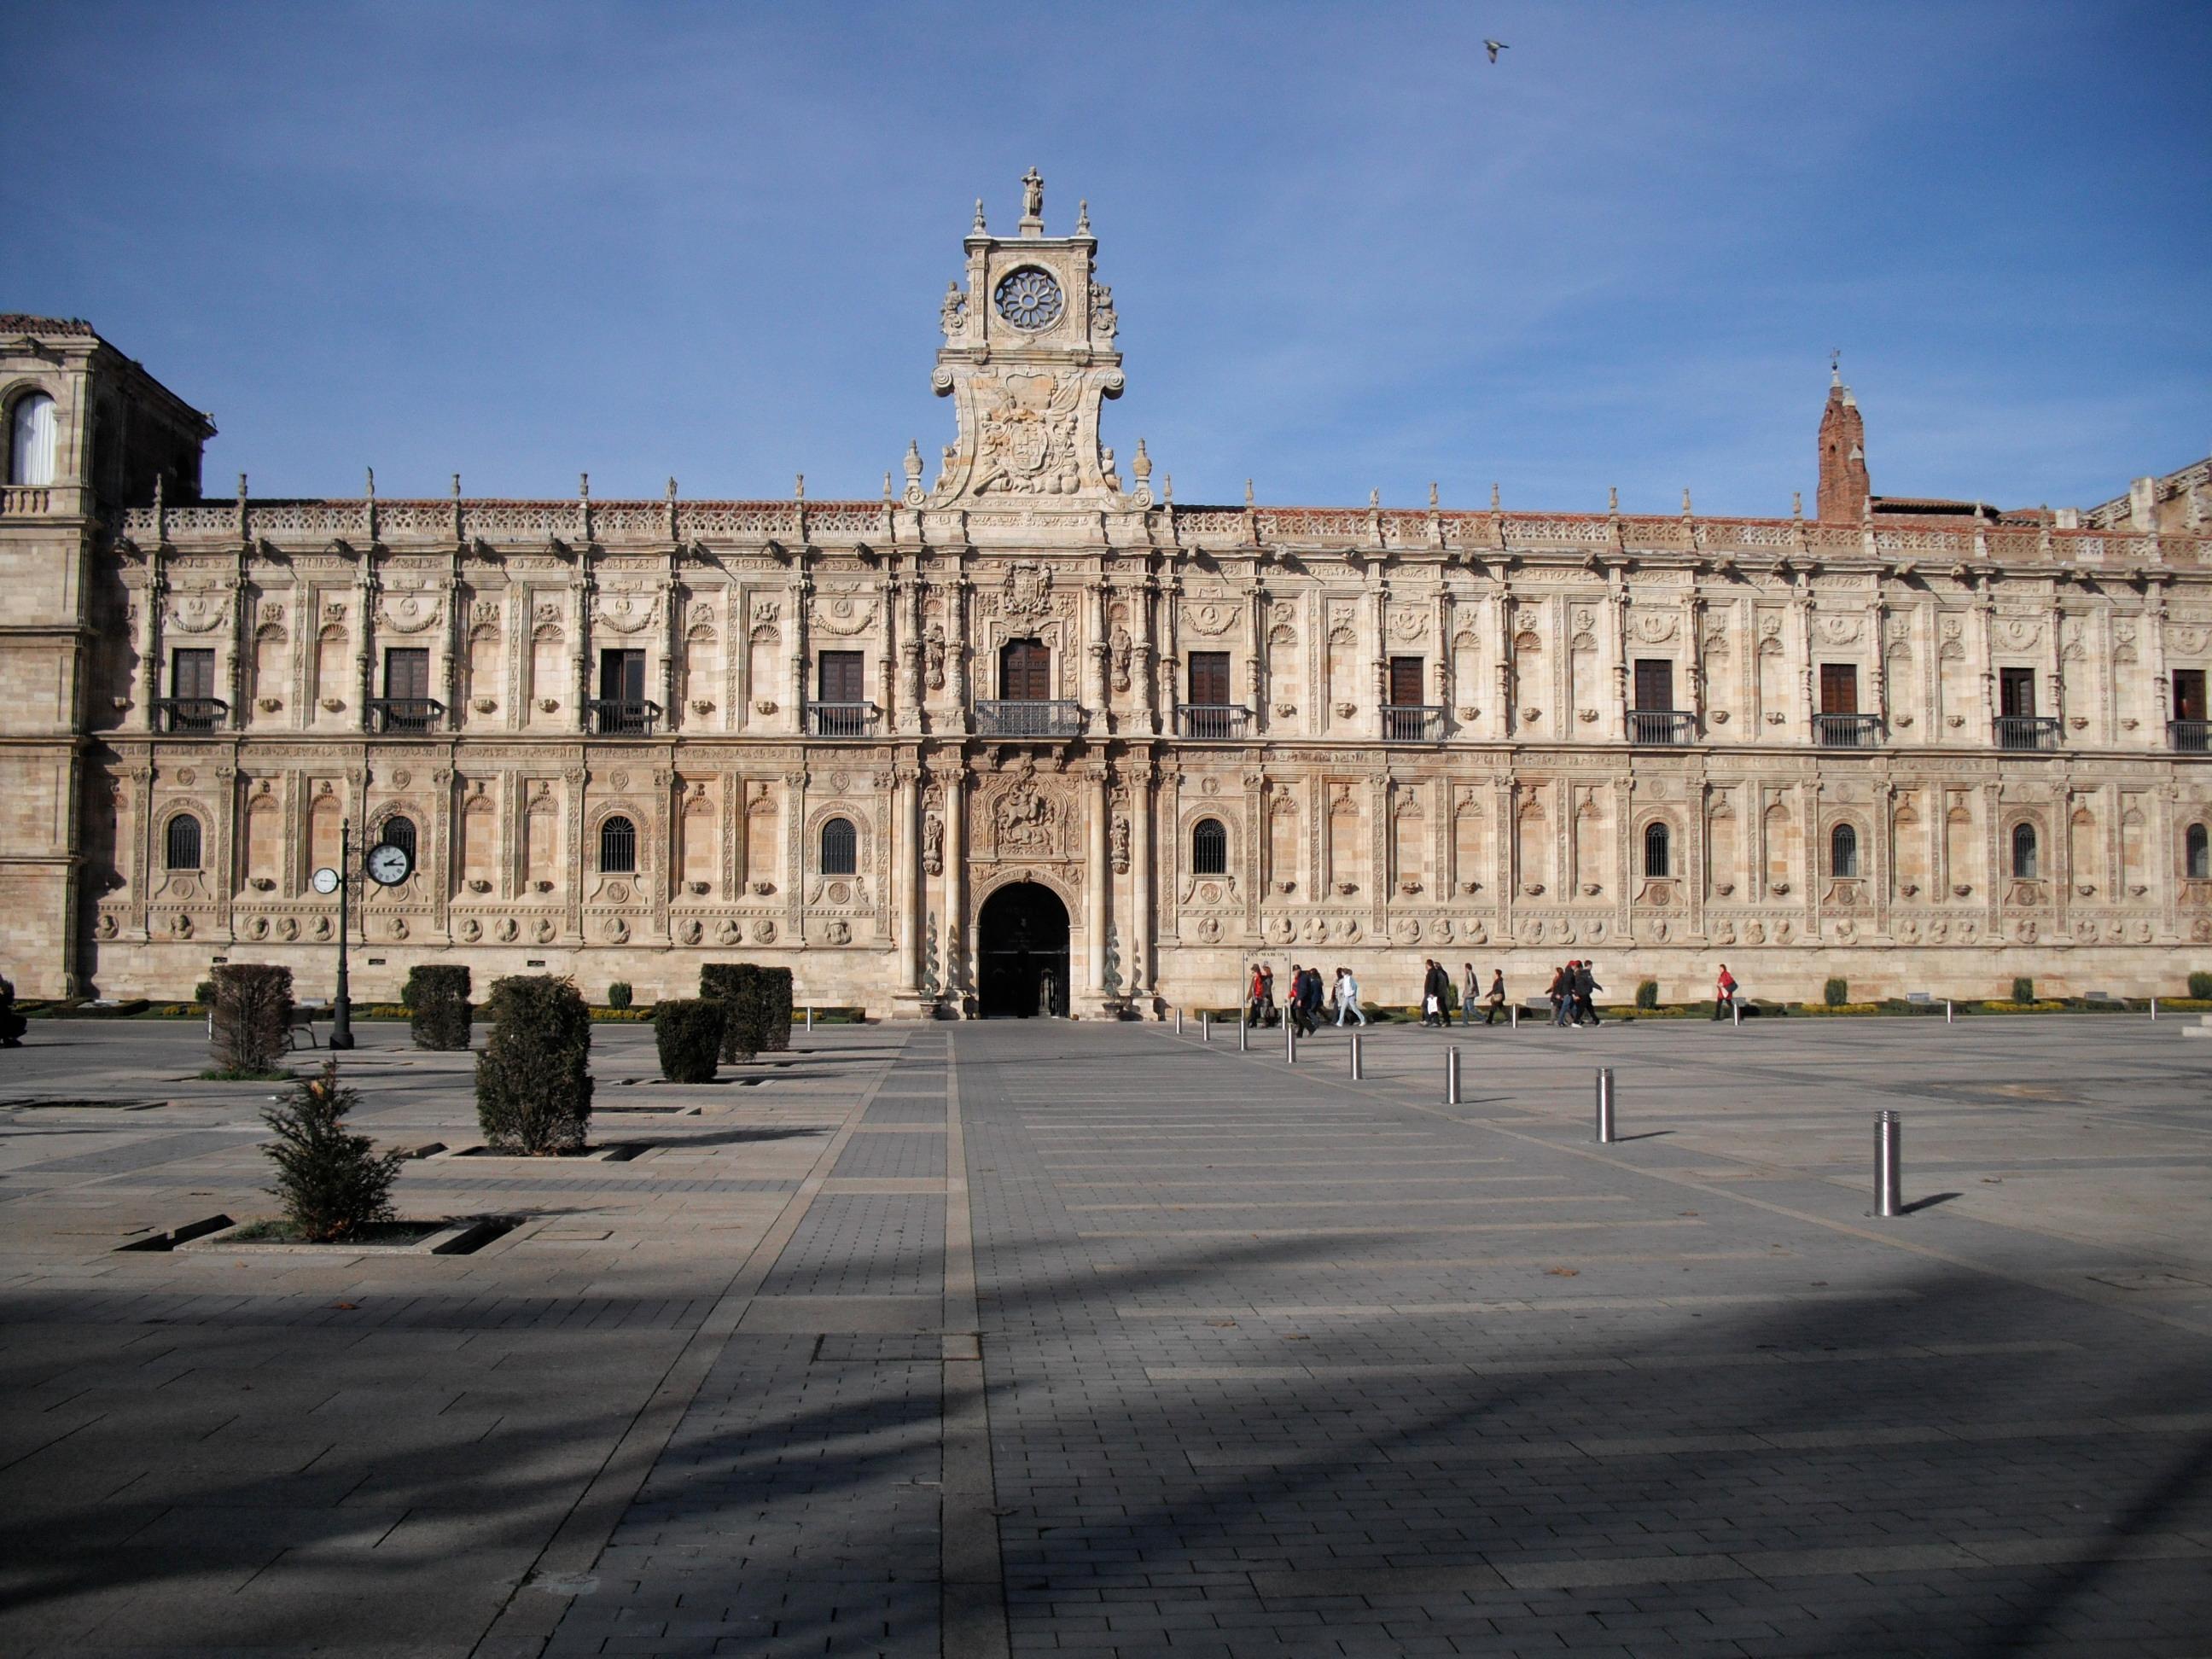 Cover image of this place Plaza de San Marcos